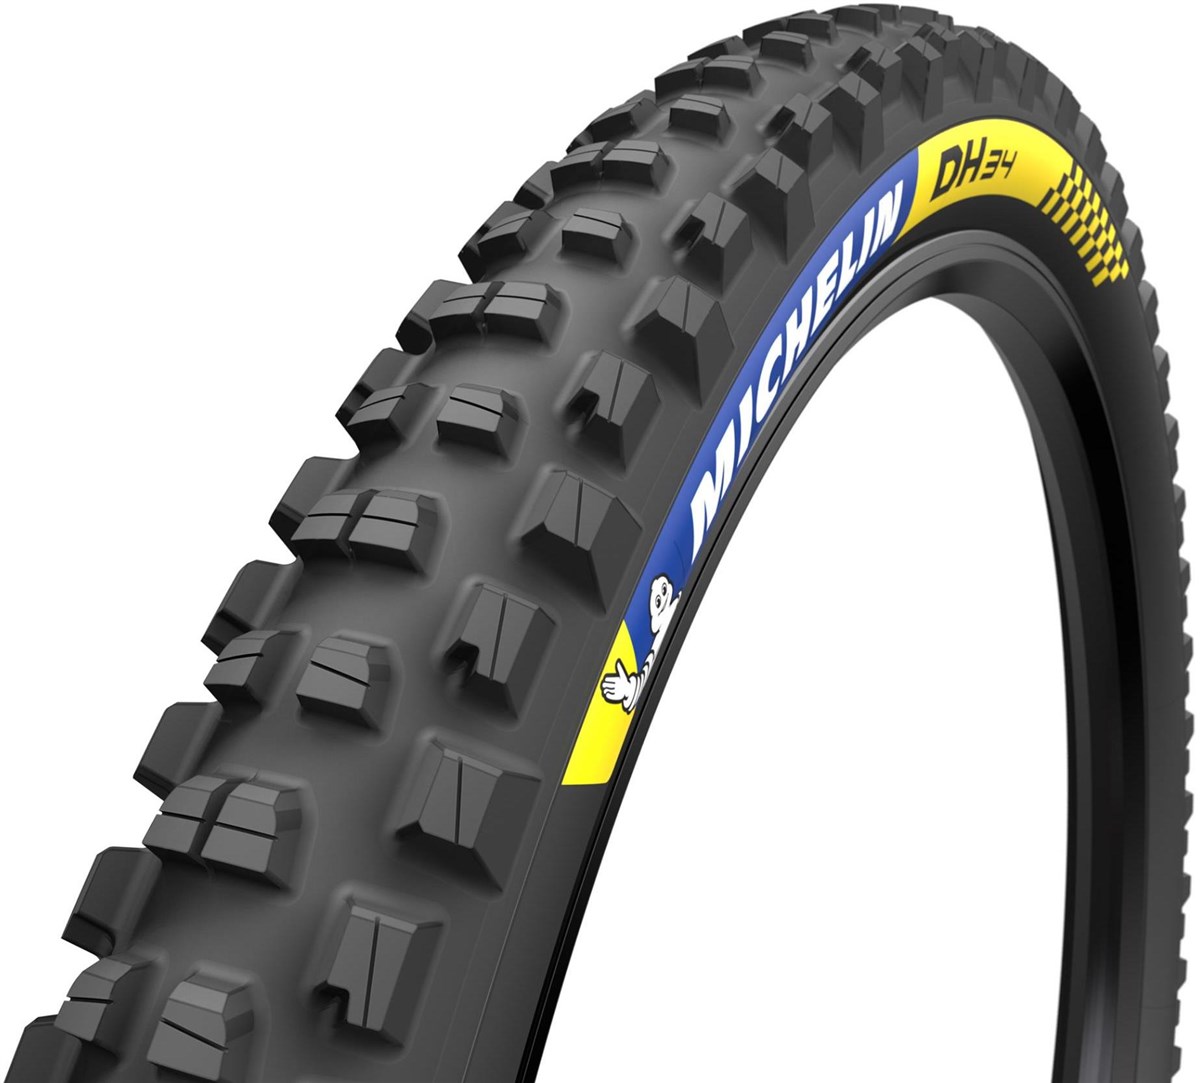 Michelin DH 34 26" MTB Tyre product image